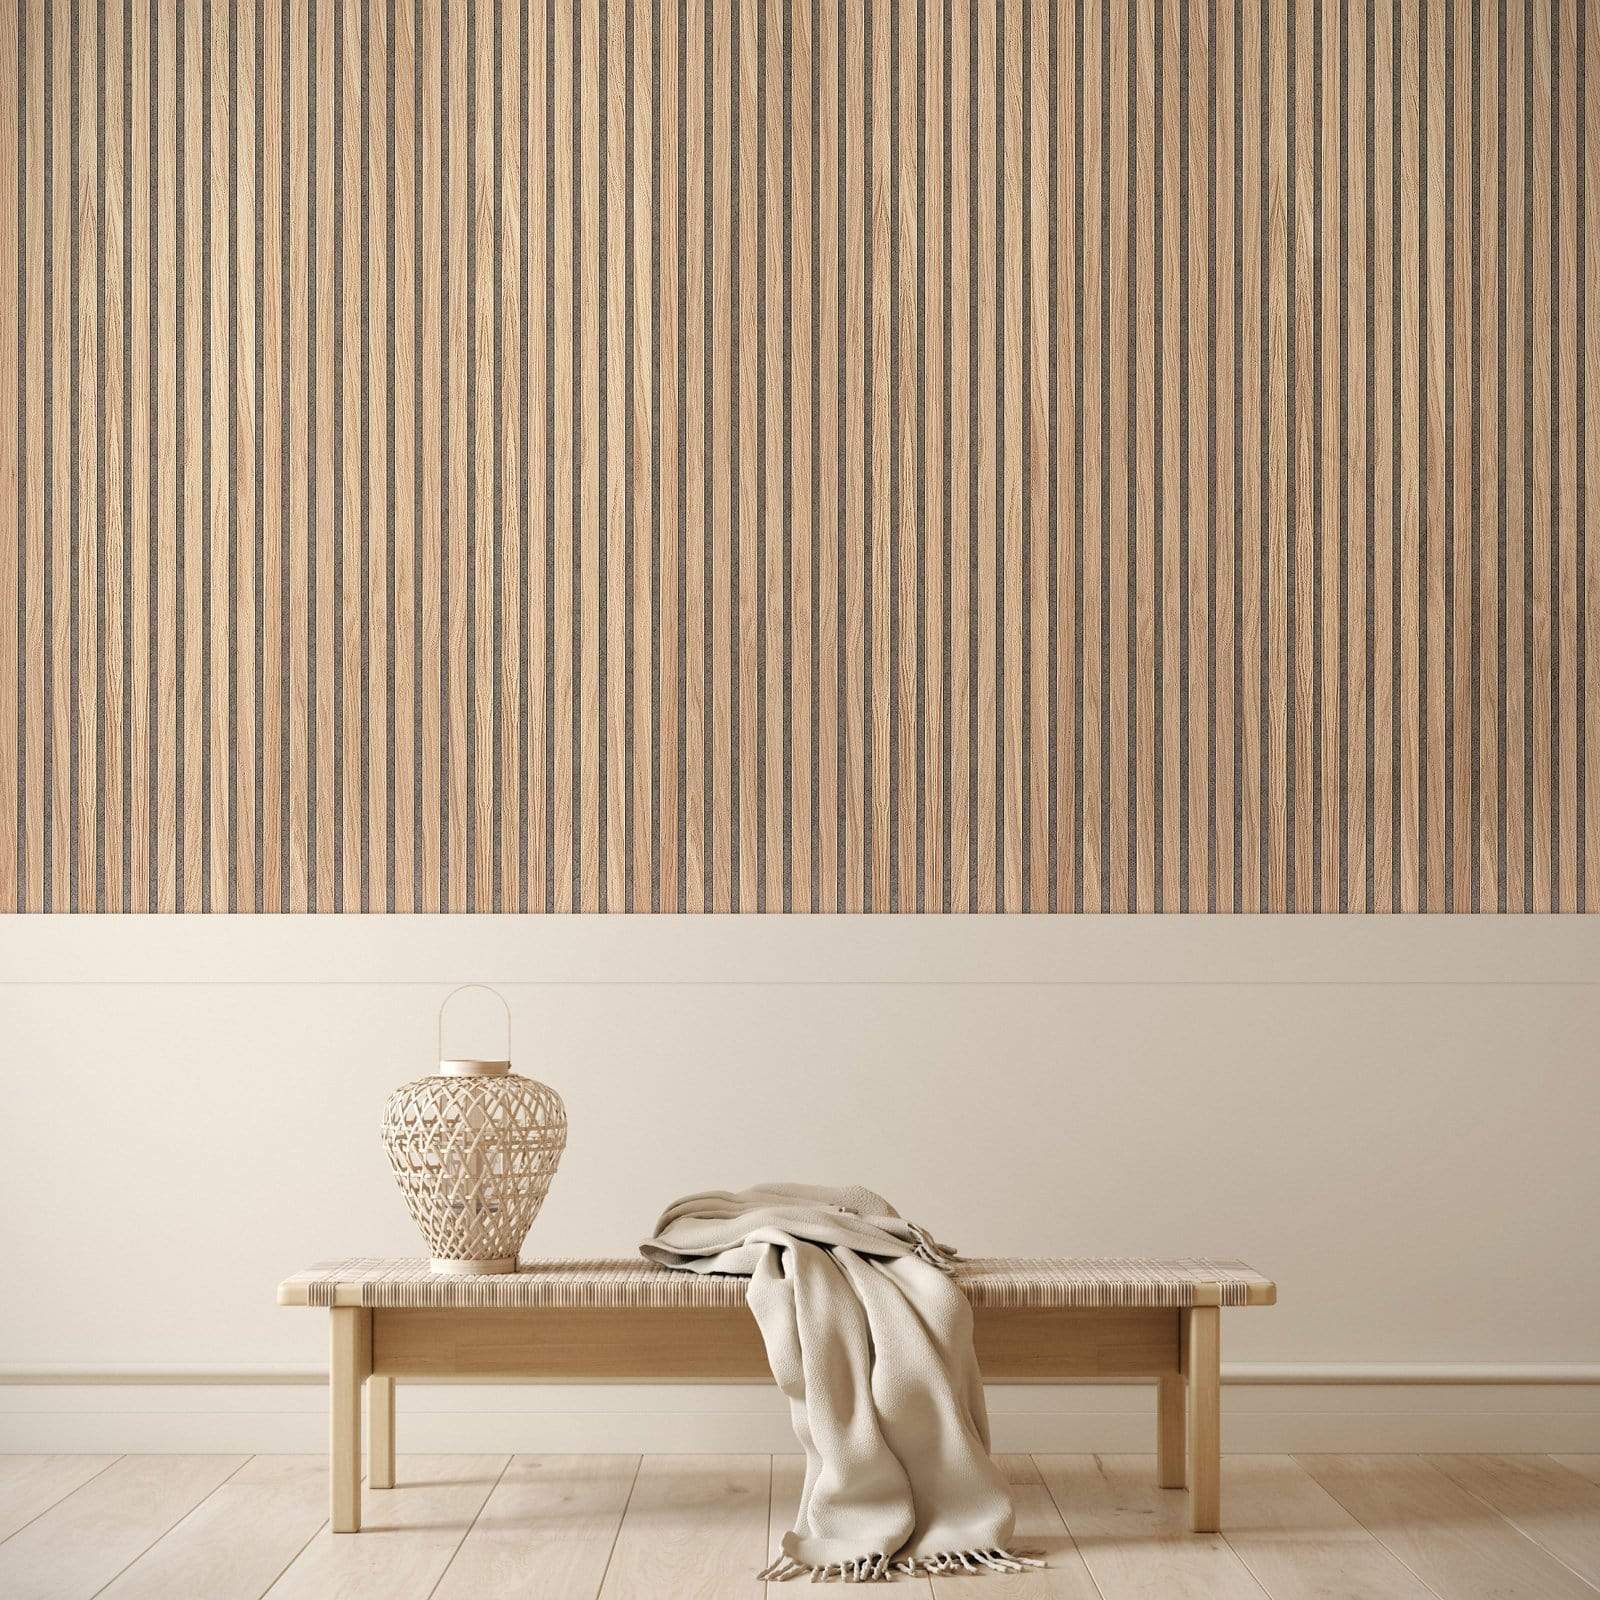 Acoustic Wood Slat Wall Panels for Interior Wall Decor | Soundproof Wall  Panels | 3D Slat Wood Panels | Bedroom Sound Absorption Decor | Seamless